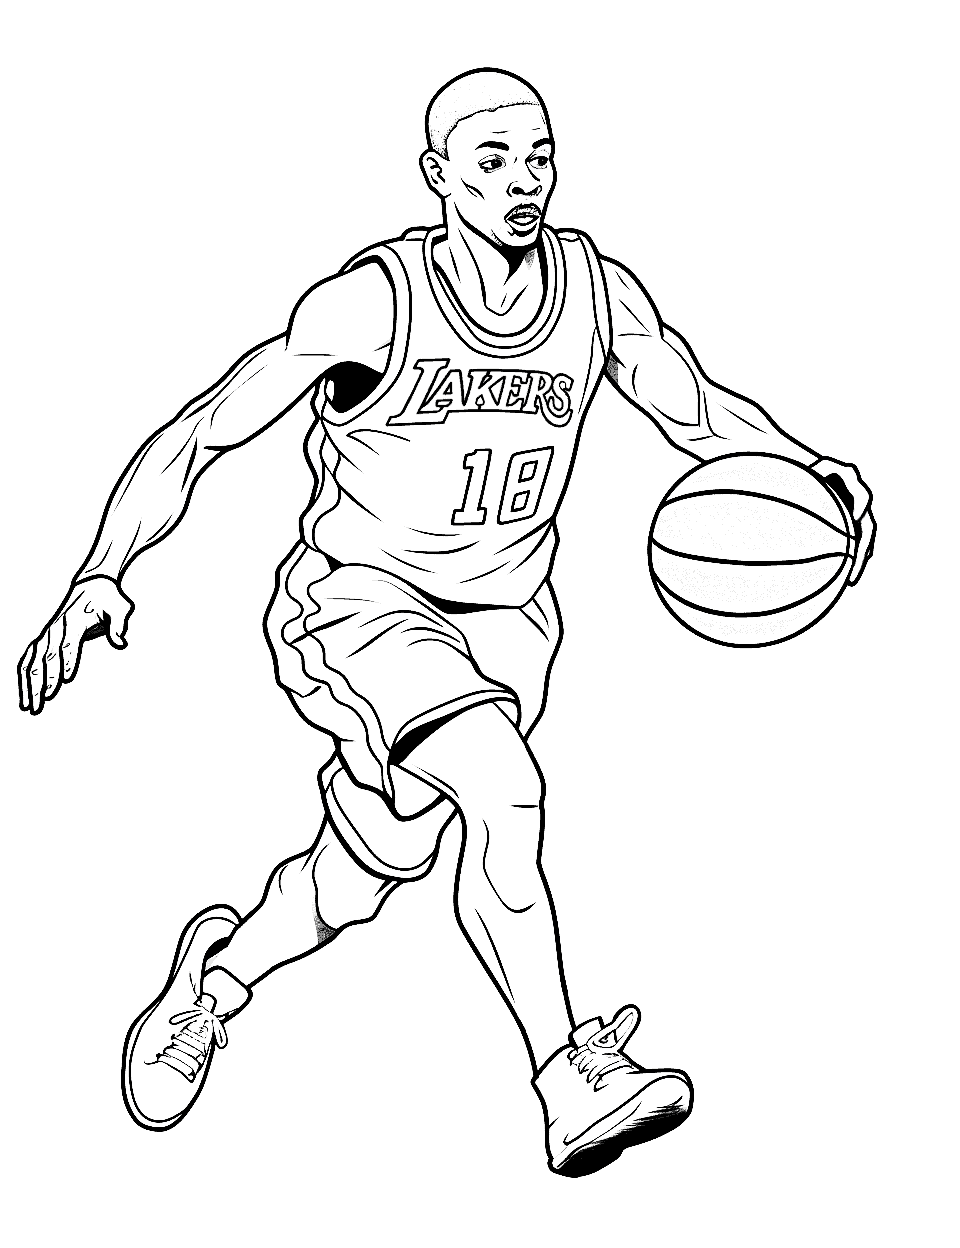 Lakers Game Day Basketball Coloring Page - A Lakers player dribbling the ball down the court.